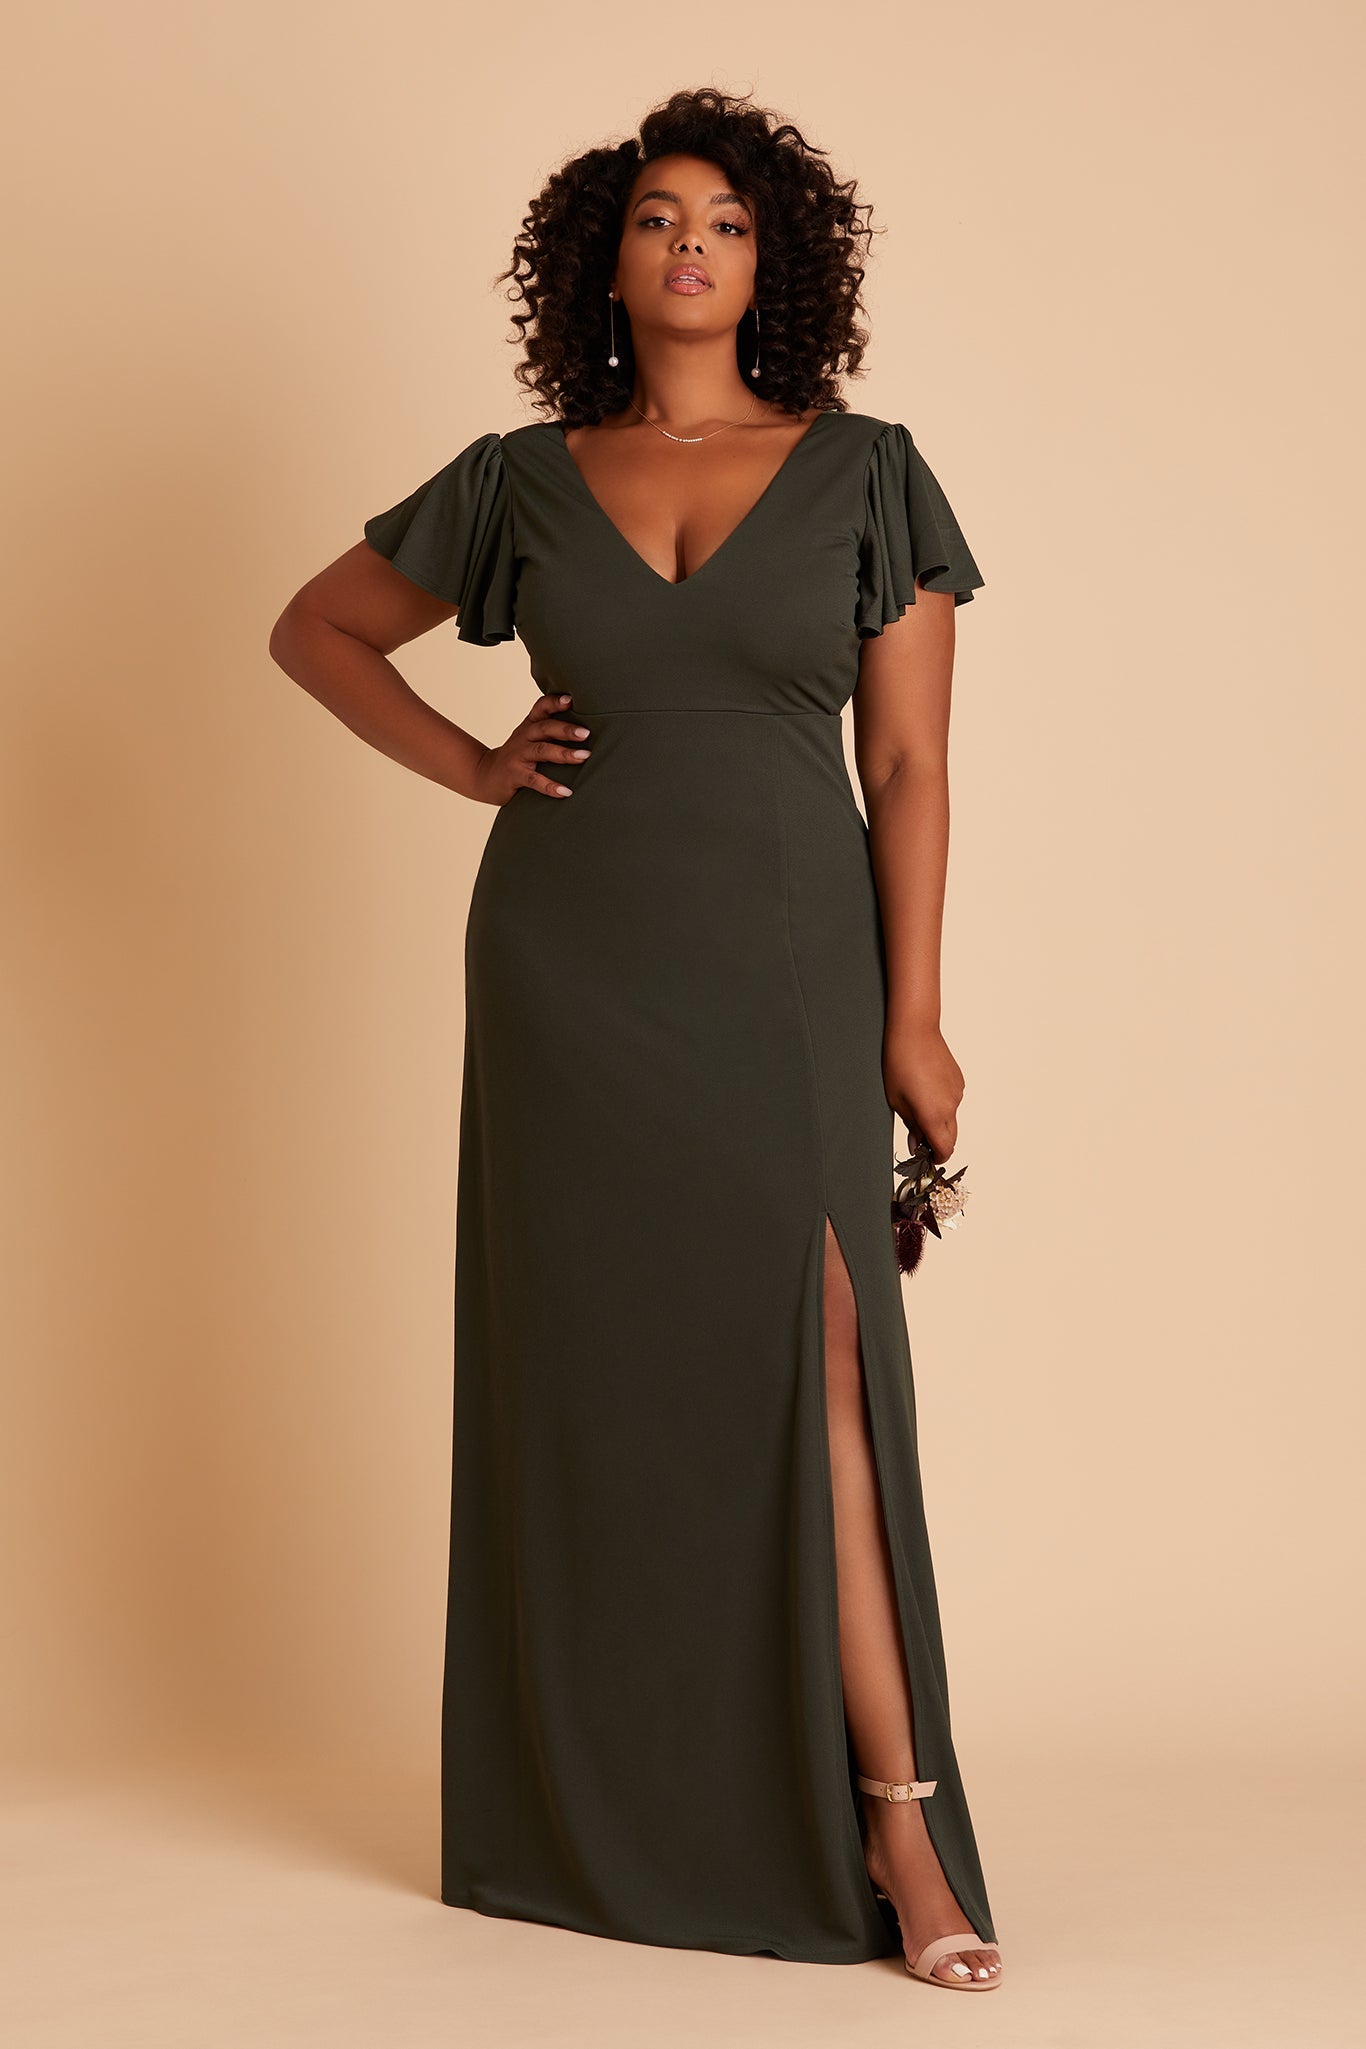 Hannah convertible plus size bridesmaid dress with slit in olive crepe by Birdy Grey, front view